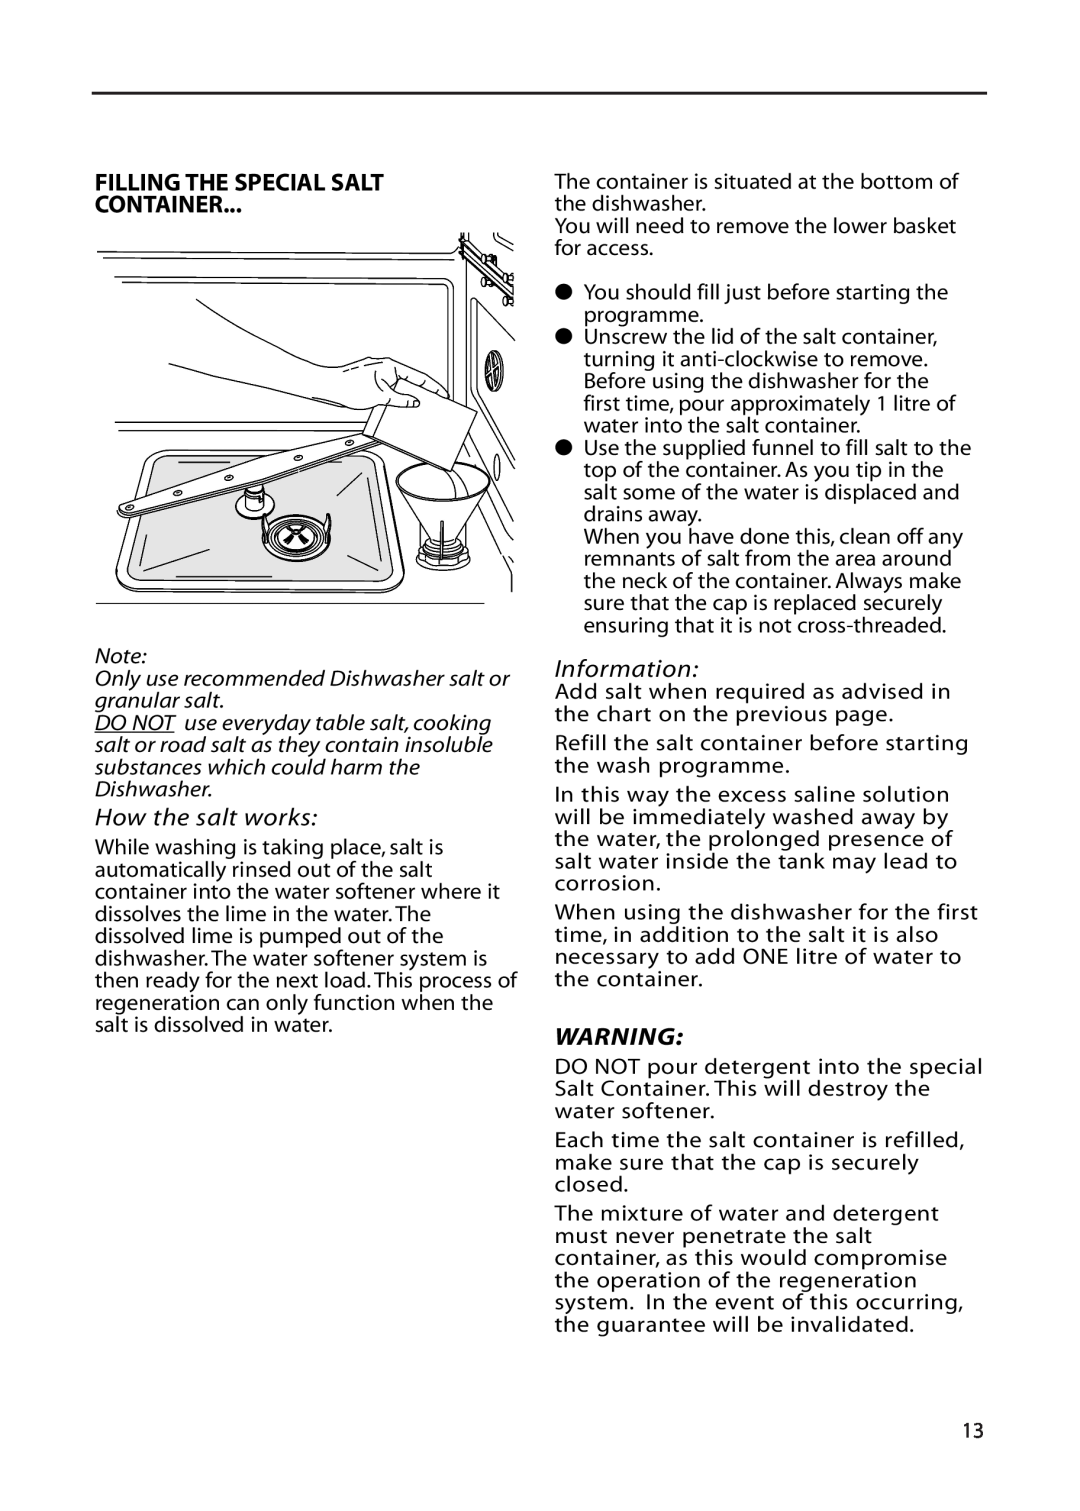 Hotpoint DF55, DF56 installation instructions Filling The Special Salt Container, How the salt works, Information 